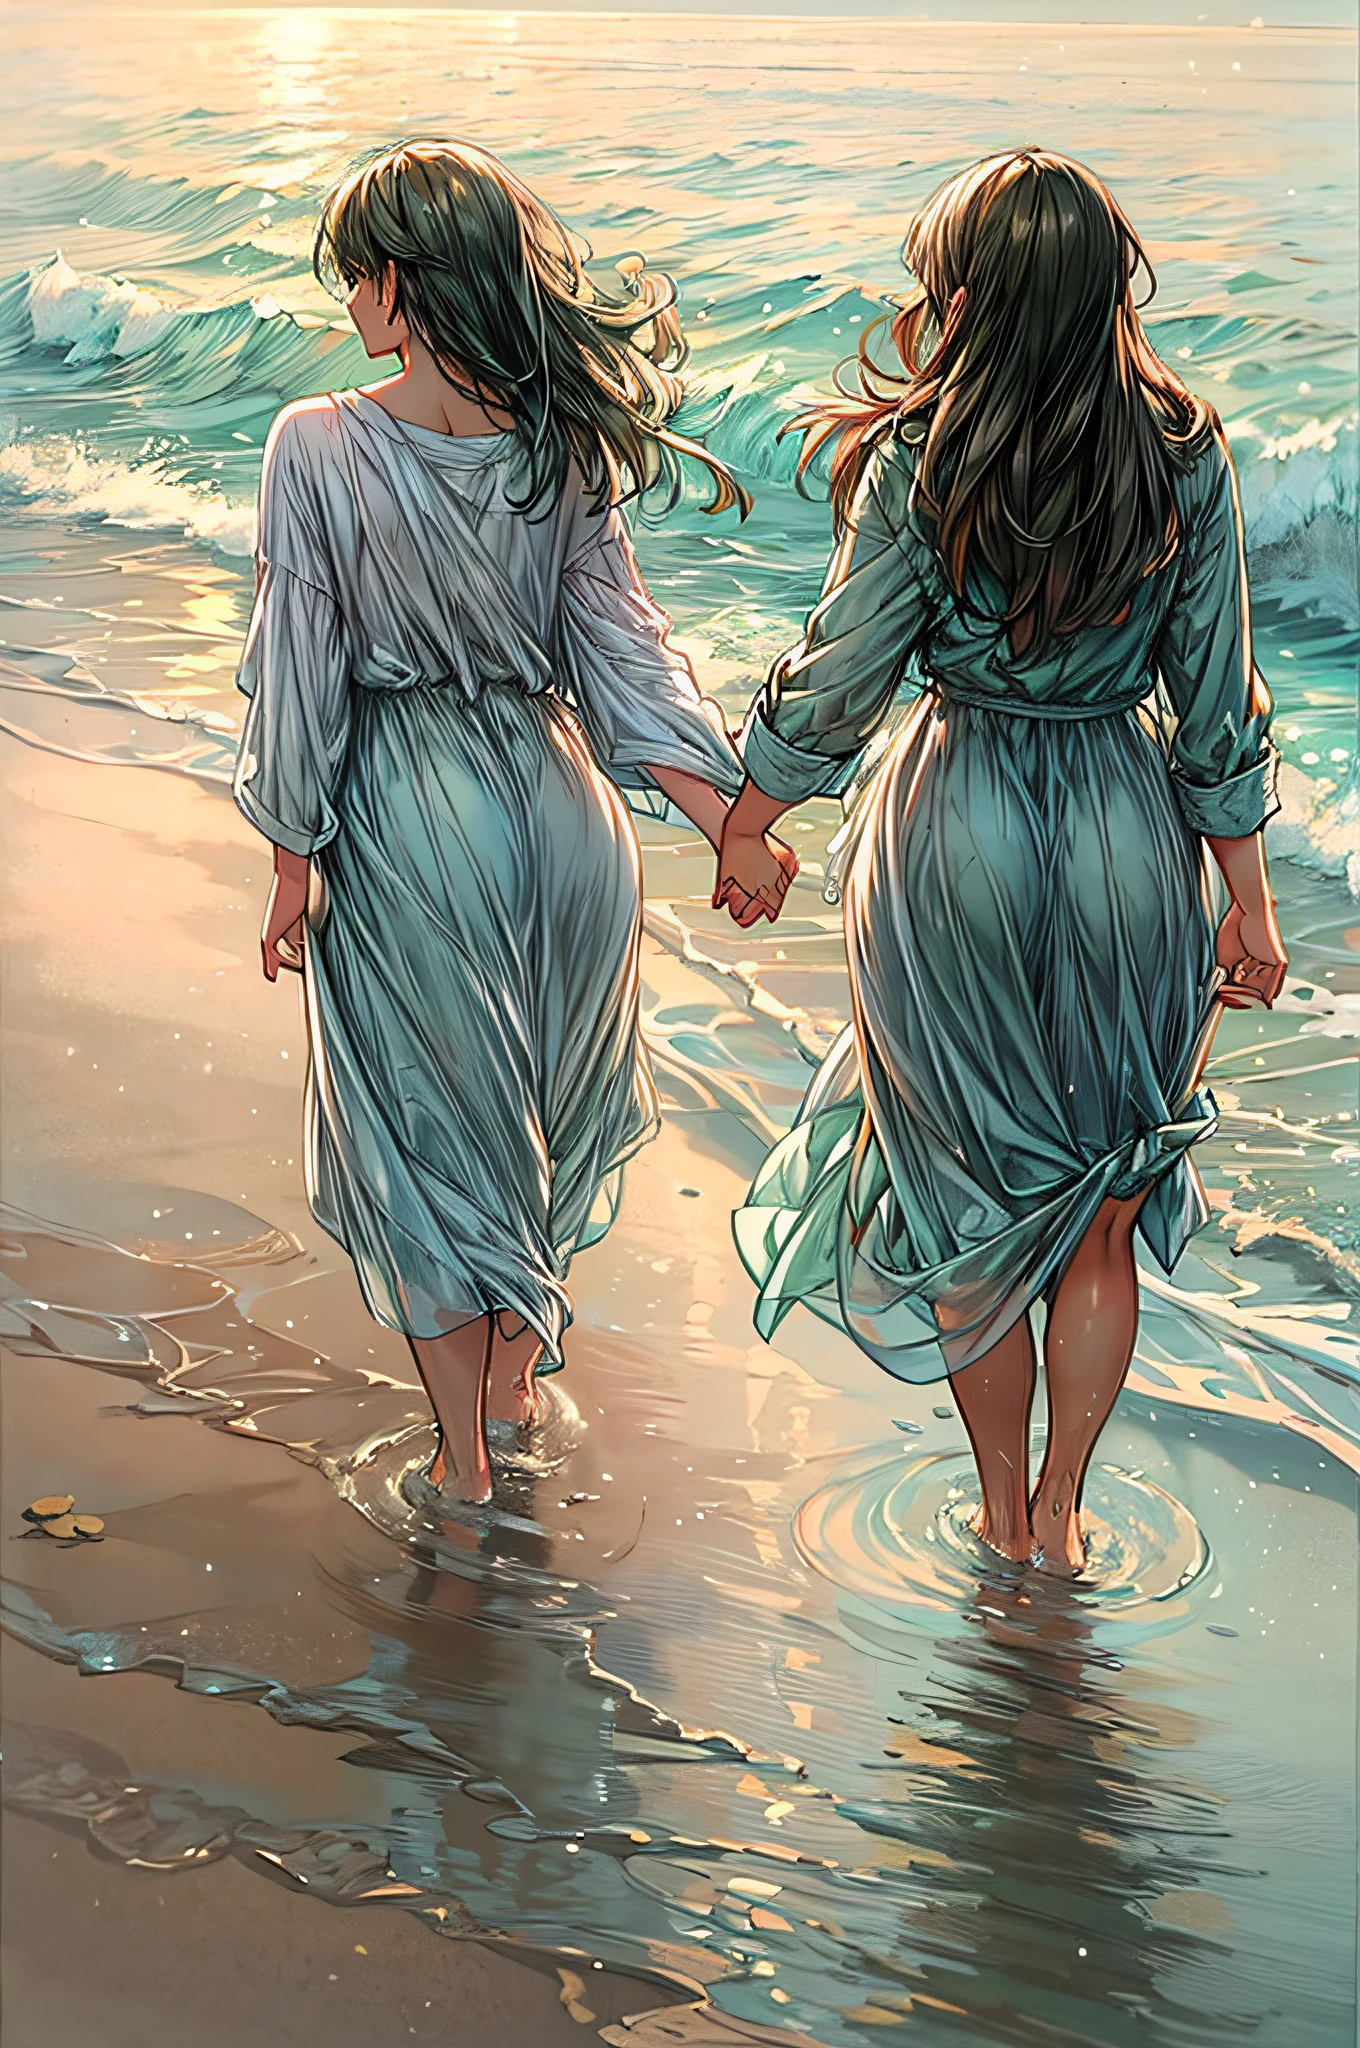 On a moonlit beach, two women walk hand in hand along the shoreline, the waves gently lapping at their bare feet. The silvery light reflects off the water, casting a romantic glow on their faces. With the stars twinkling above and the distant sound of crashing waves, their lips meet in a tender kiss filled with longing and connection. The salty breeze carries their laughter and the scent of the sea, enveloping them in a serene and passionate moment. The scene is captured in a dreamy, soft-focus style using pastel colors and gentle brushstrokes, conveying the timeless nature of their love.